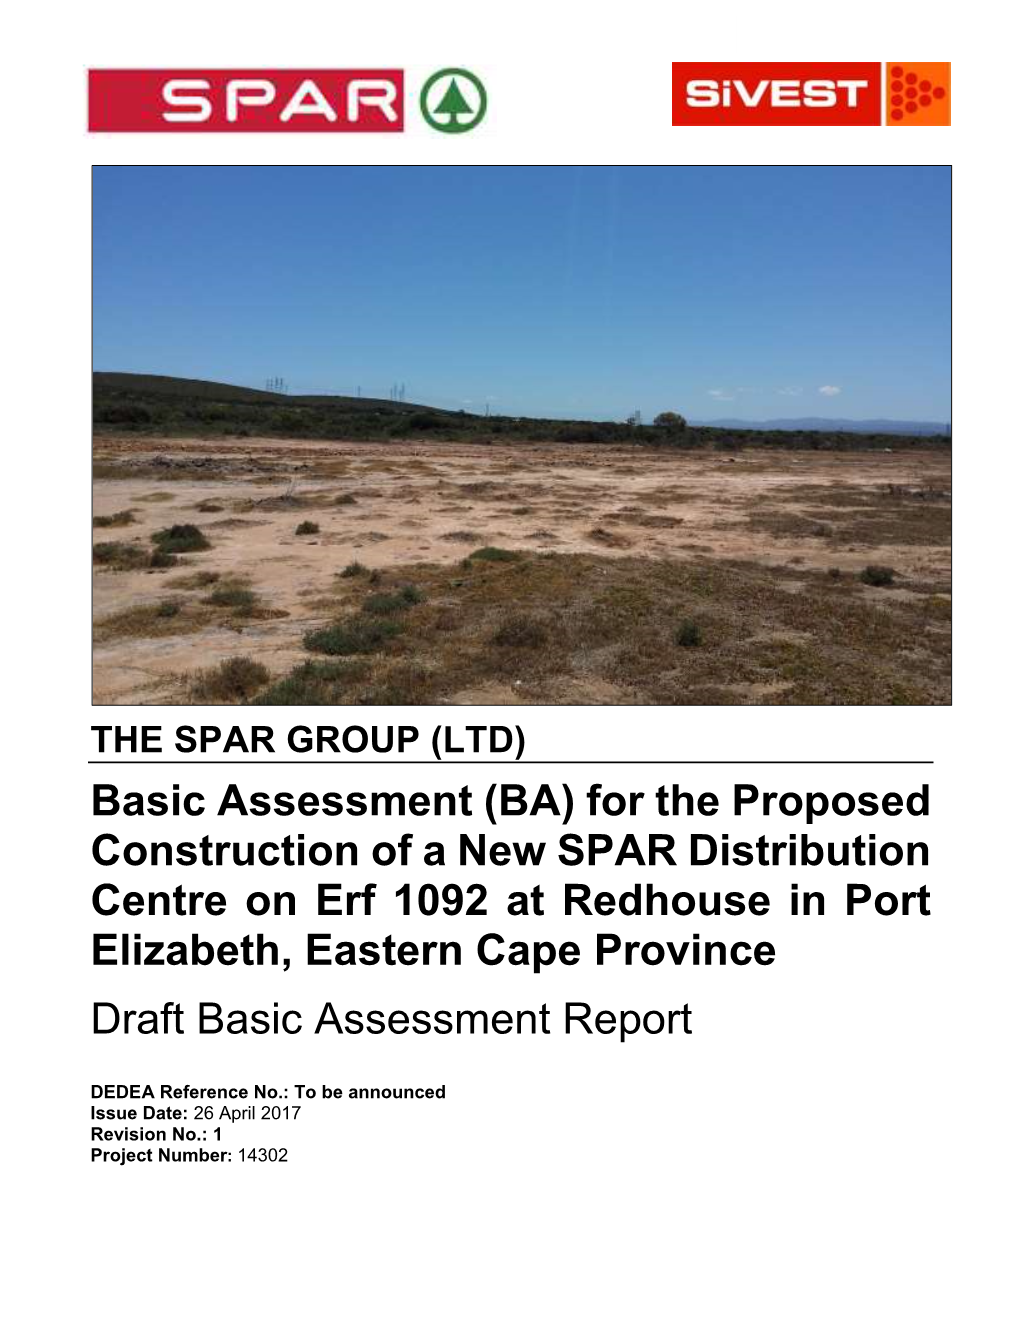 (BA) for the Proposed Construction of a New SPAR Distribution Centre on Erf 1092 at Redhouse in Port Elizabeth, Eastern Cape Province